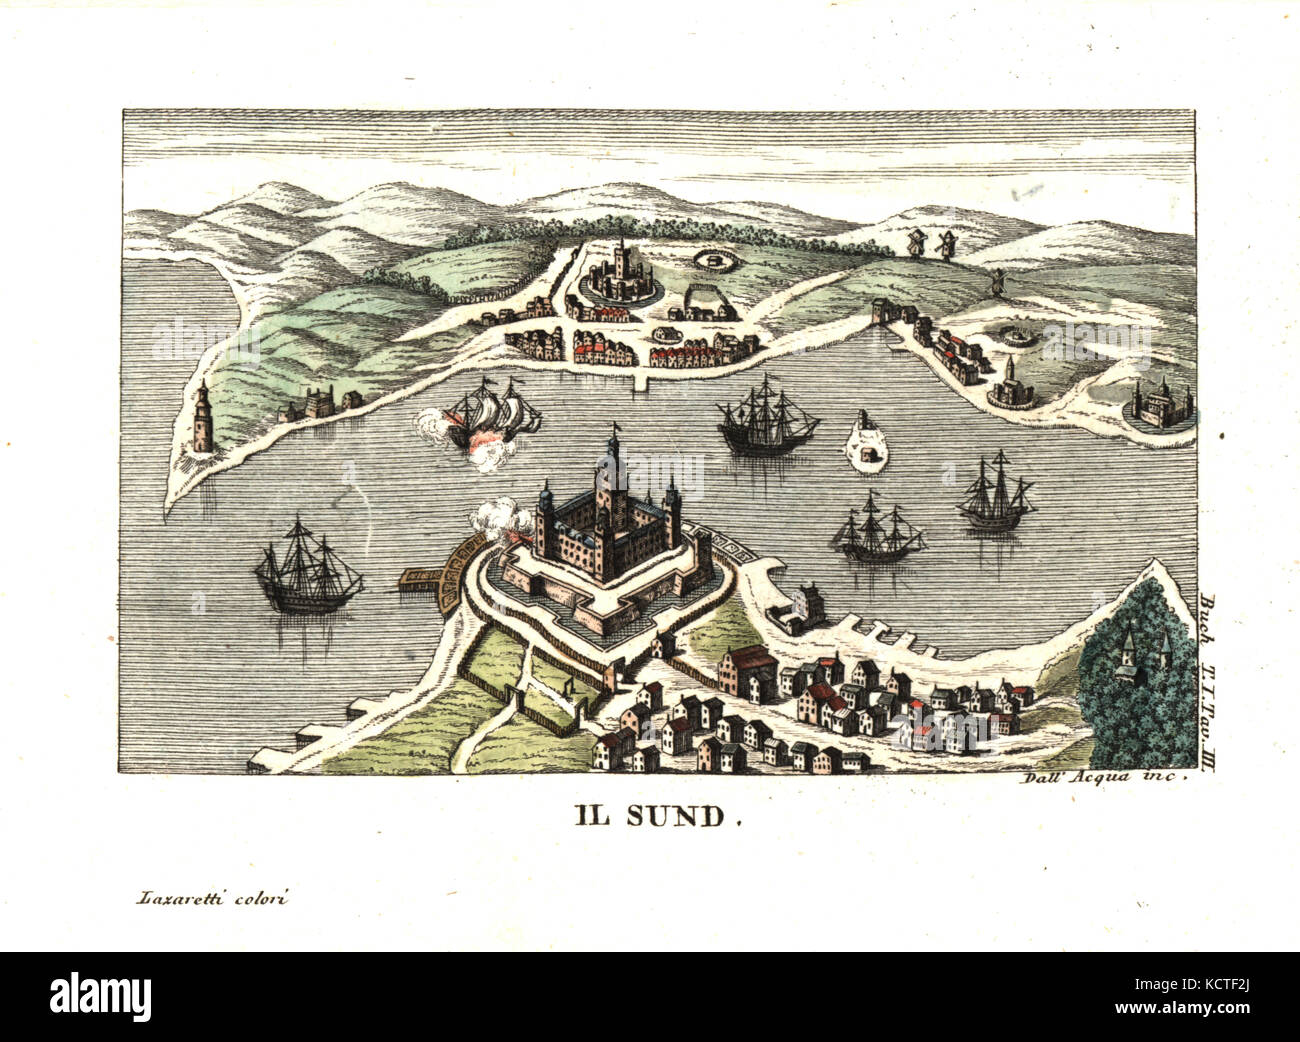 The Sund (channel) with Kronborg Castle, Helsingor (Elsinore), Denmark and Helsingborg, Sweden, on the other side. Illustration from Leopold von Buch’s Travels Through Norway and Lapland, 1813. Copperplate engraving by Dell'Acqua handcoloured by Lazaretti from Giovanni Battista Sonzogno’s Collection of the Most Interesting Voyages (Raccolta de Viaggi Piu Interessanti), Milan, 1815-1817. Stock Photo